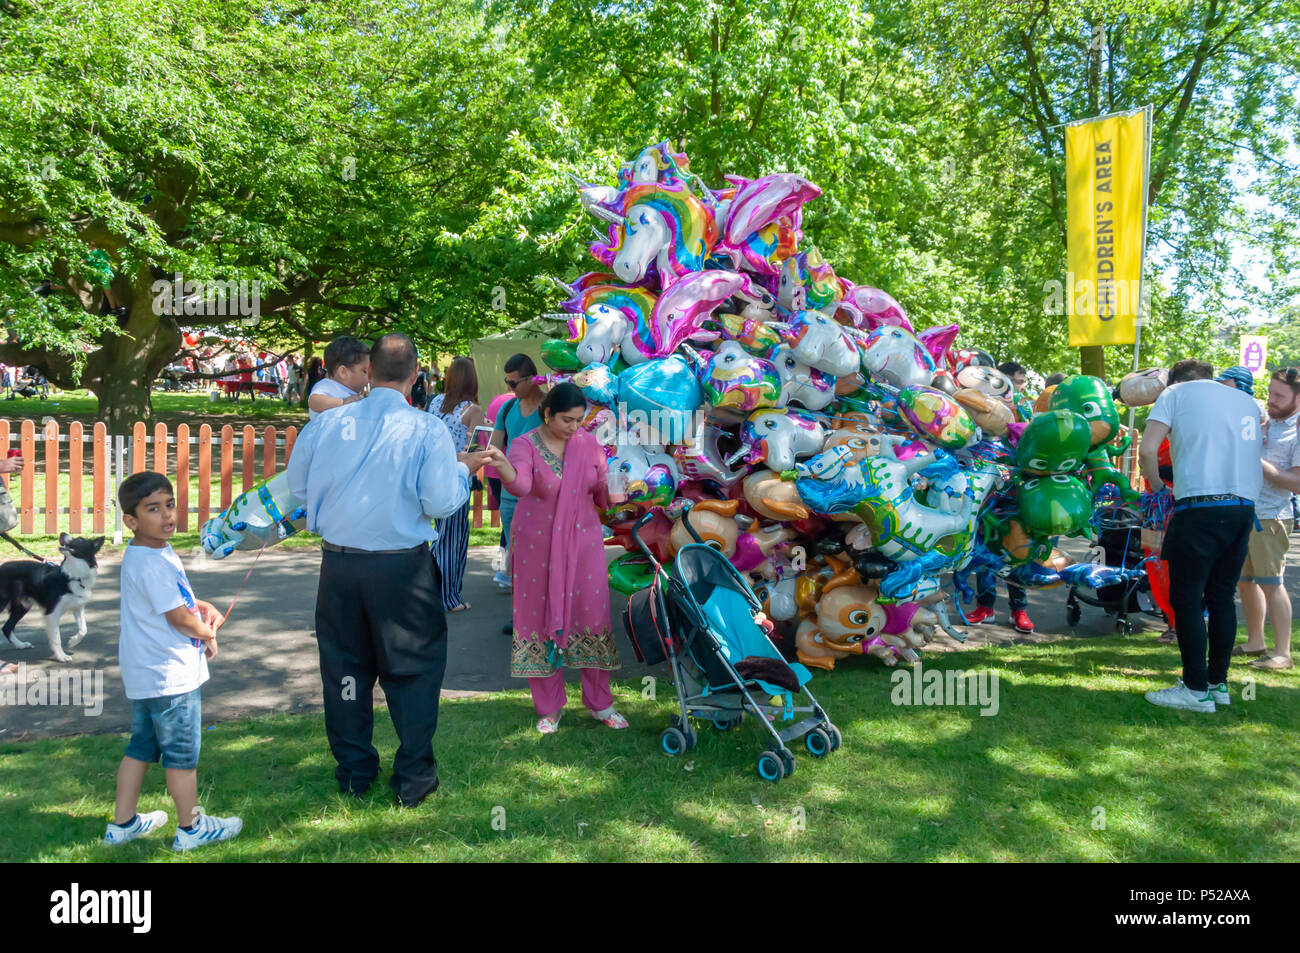 Glasgow, Scotland, UK. 24th June, 2018. A helium balloon seller at Glasgow  Mela, an annual multicultural music festival held in Kelvingrove Park. This  year's performers included Miss Pooja, Akbar Ali, Black Star